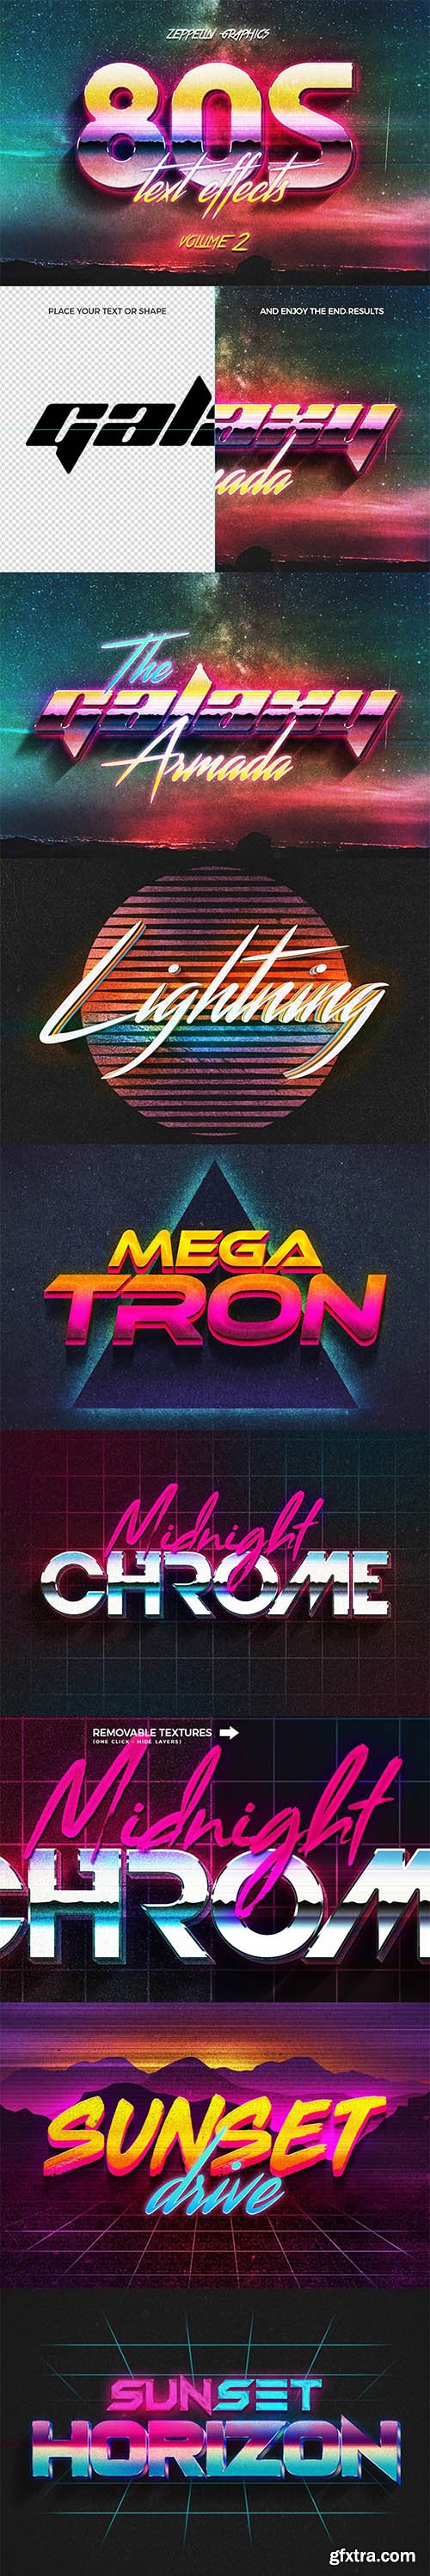 Graphicriver 80s Text Effects Vol.2 26502843